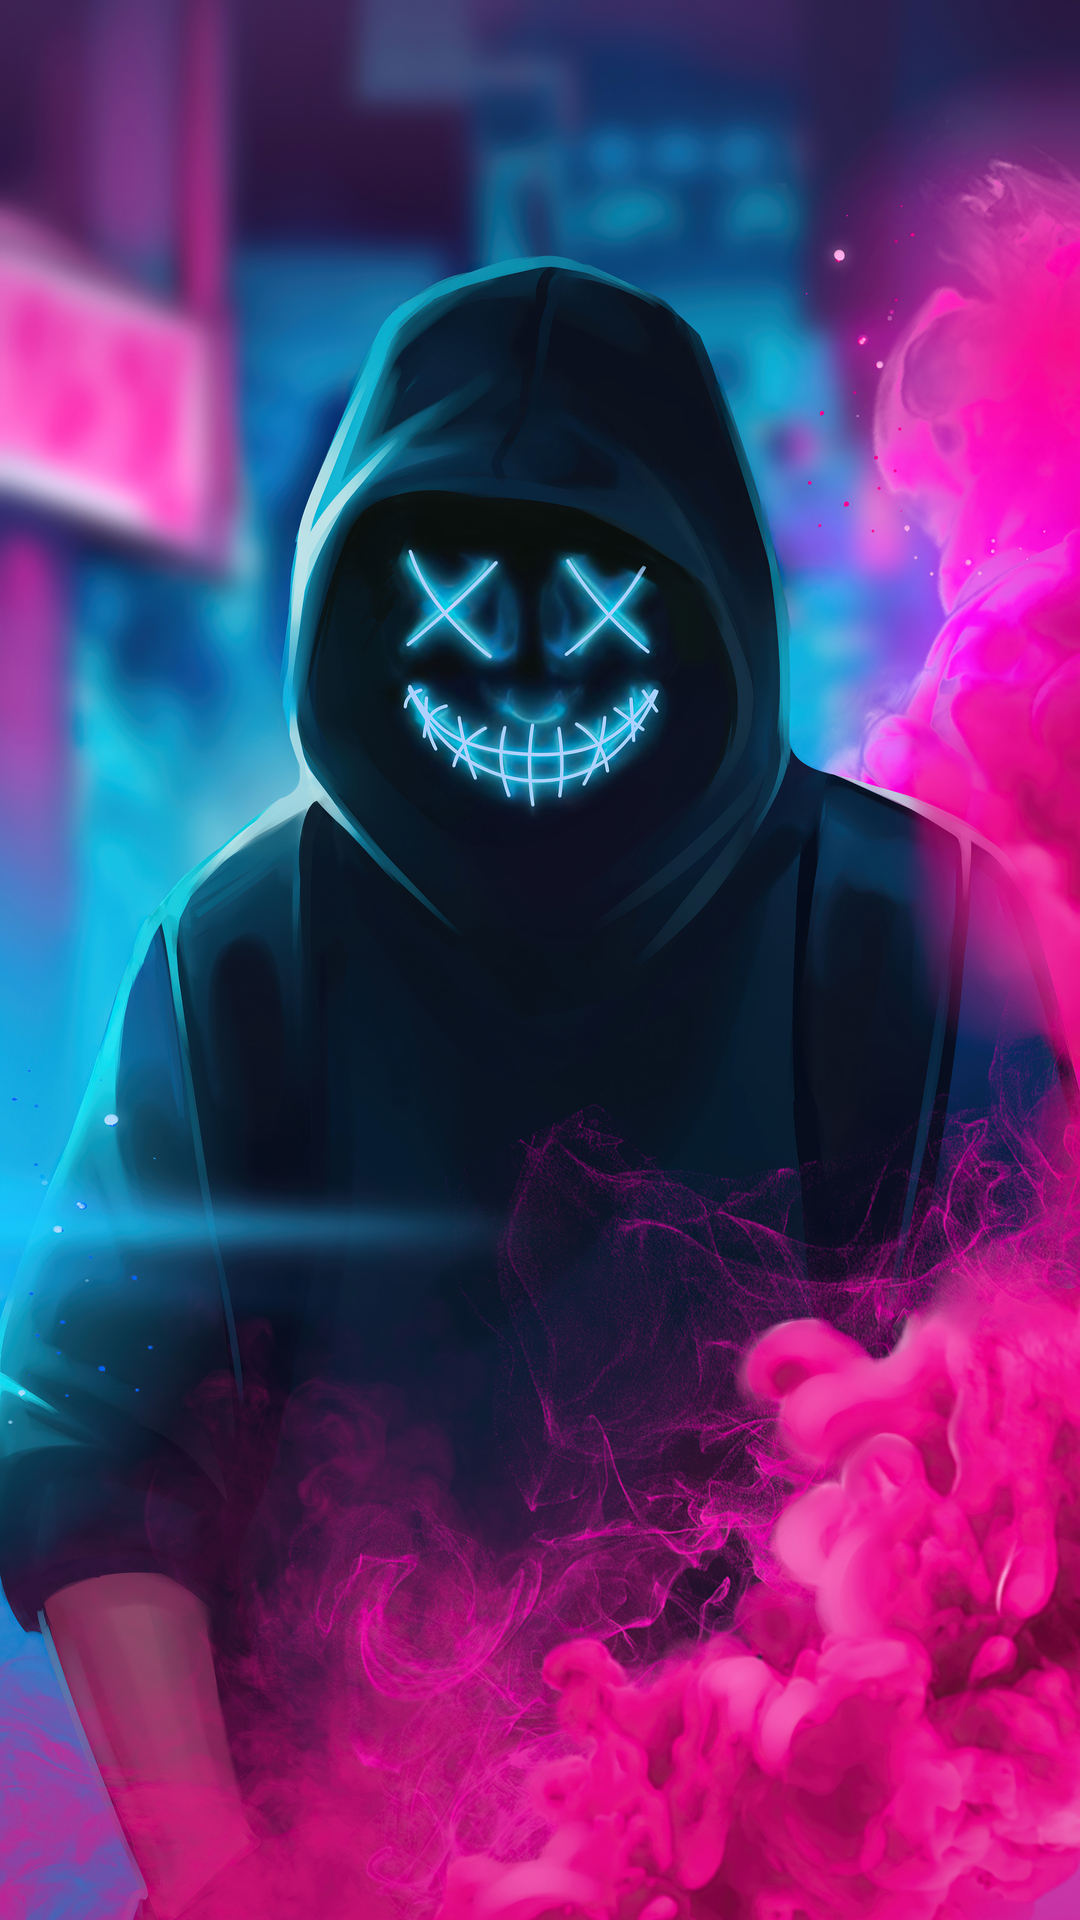 1080x1920 Neon Guy Mask Smiling 4k Iphone 7,6s,6 Plus, Pixel xl ,One ...